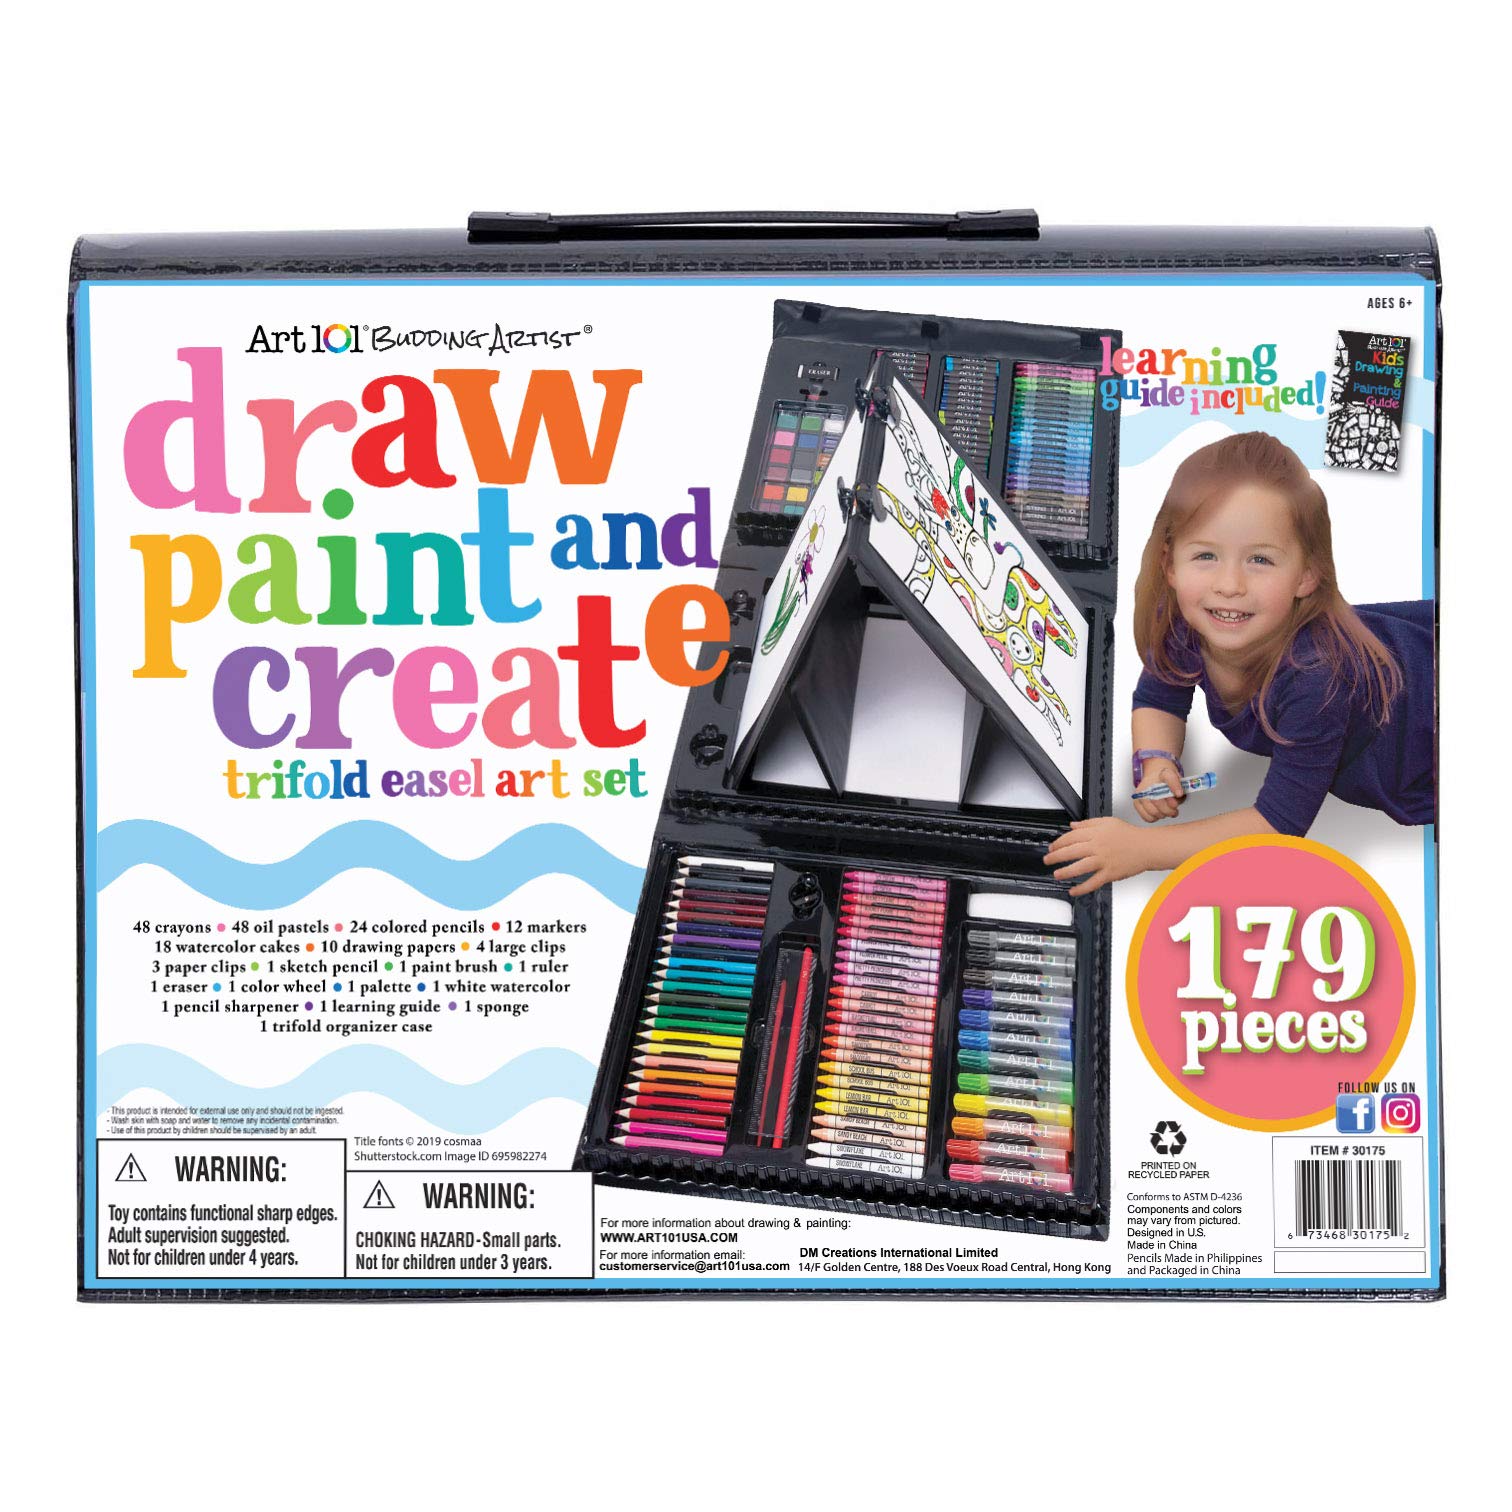 Art 101 Budding Artist 179 Piece Draw Paint and Create Art Set with Pop-Up Double-Sided Easel, Includes markers, crayons, paints, colored pencils, Case includes pop up easel, Portable Art Studio